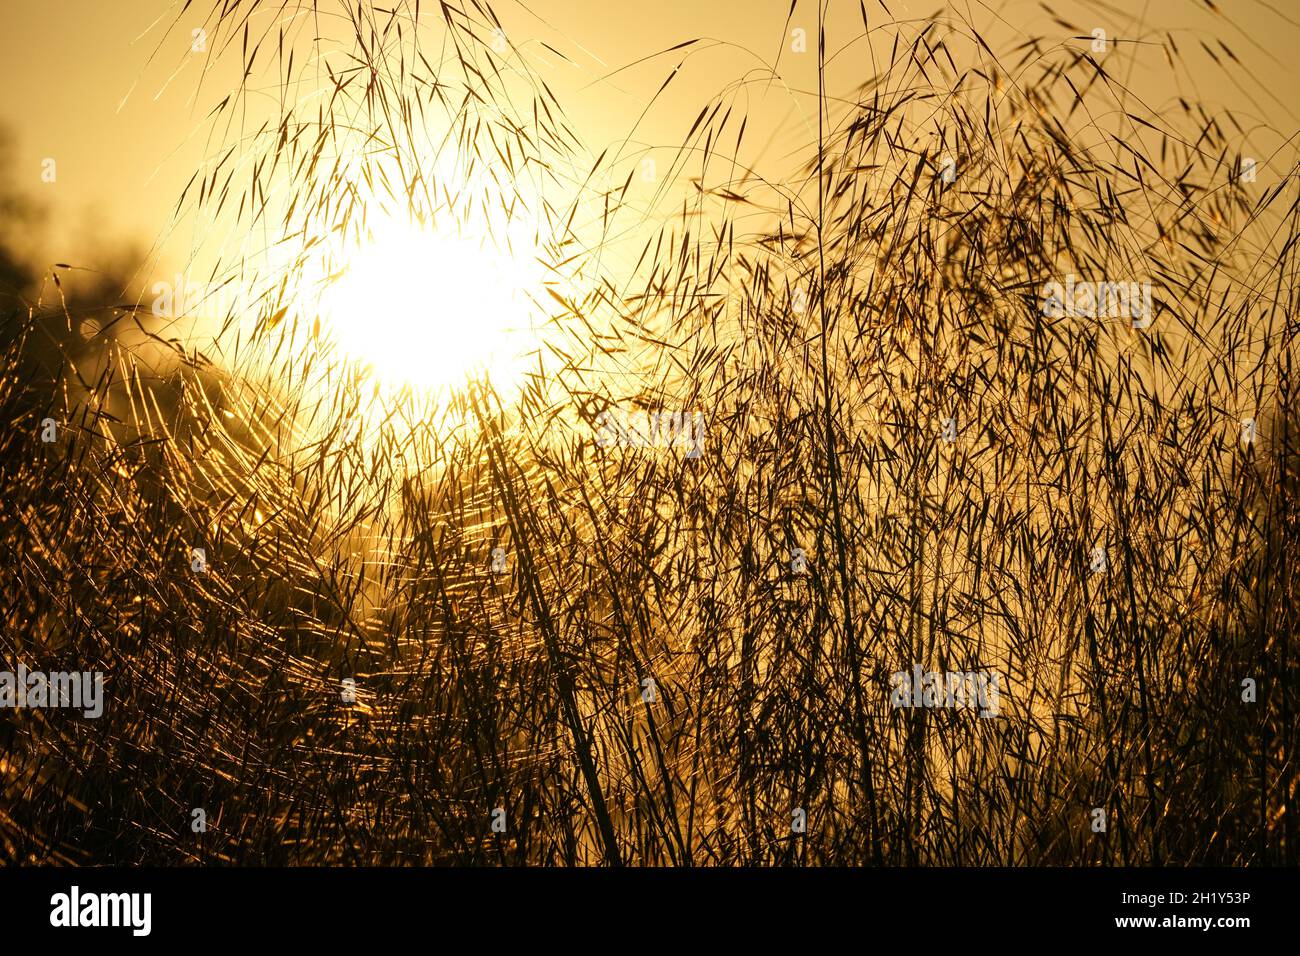 Silhouette of ornamental grass plants seen against the sun Stock Photo